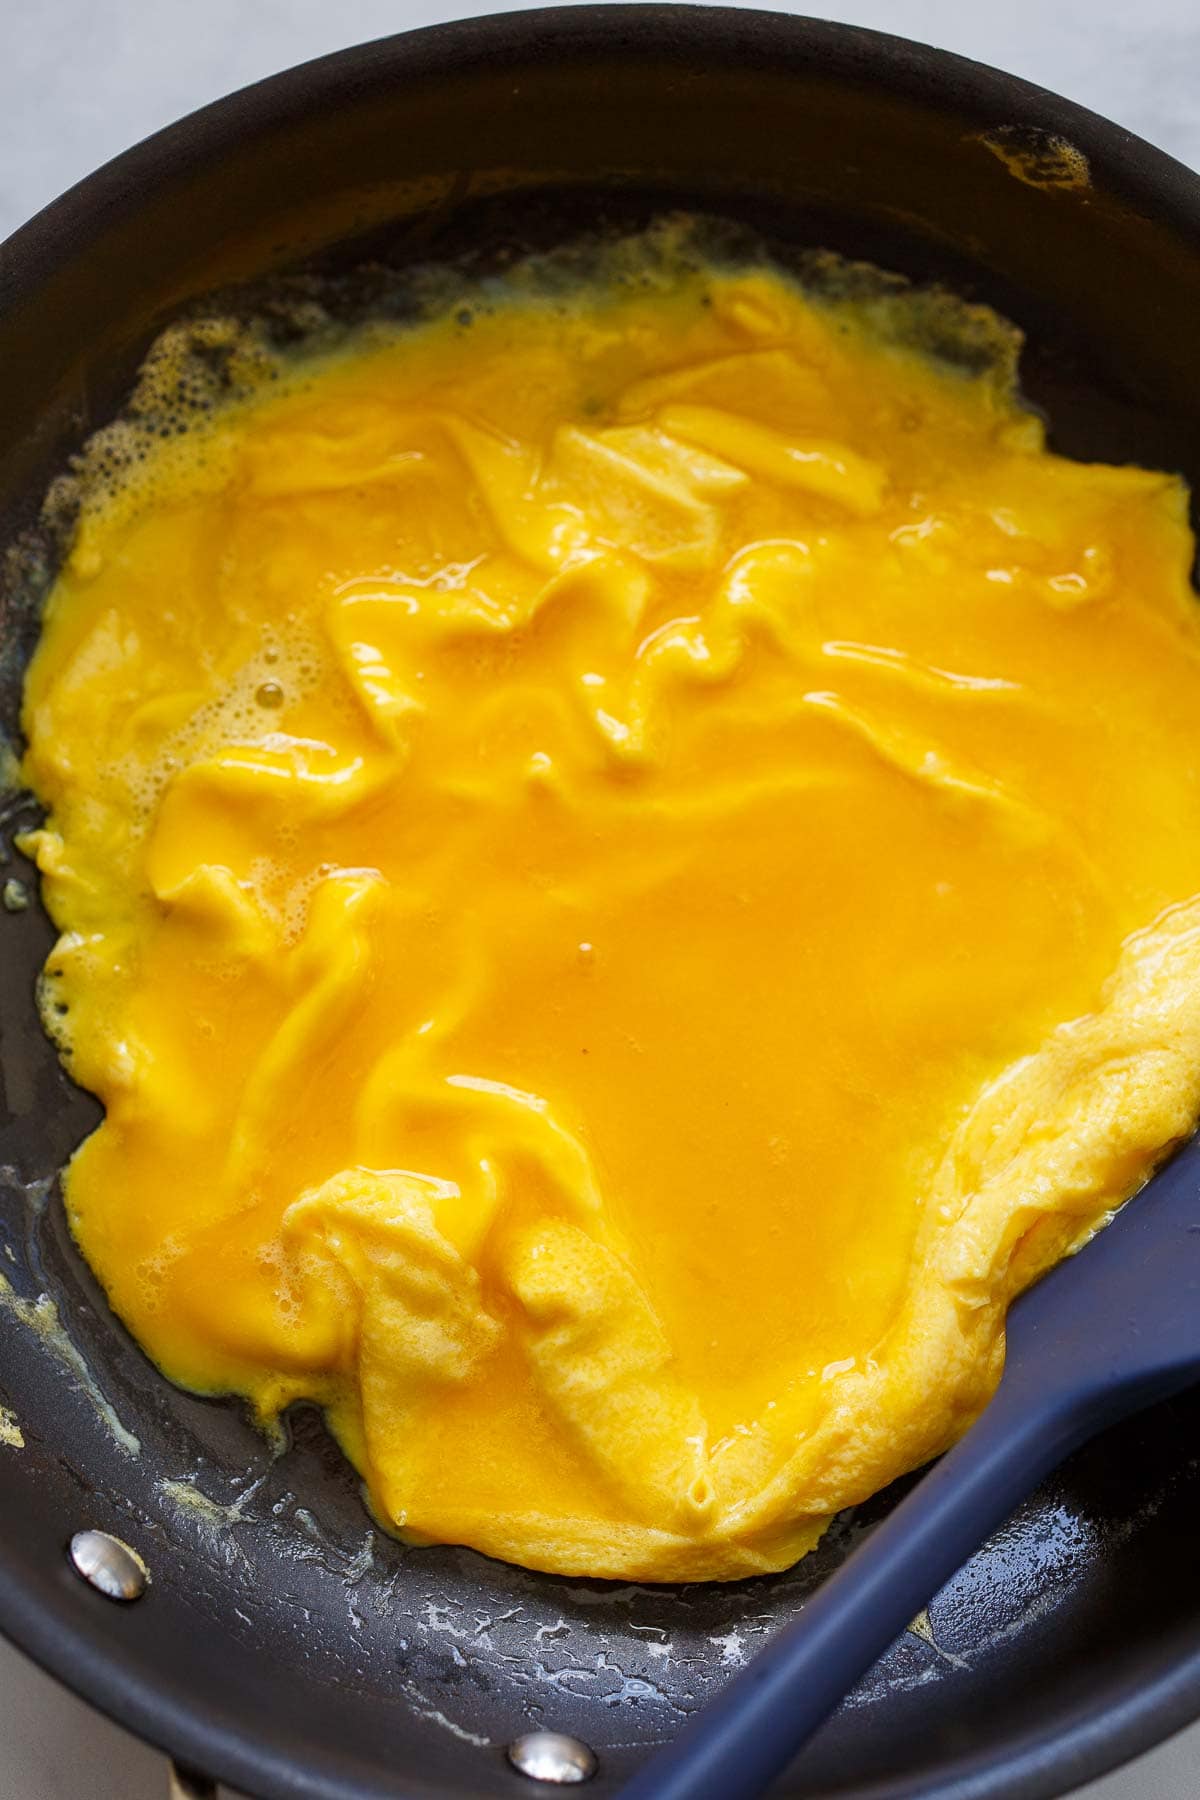 omelette cooking in skillet with spatula pushing edges toward center.